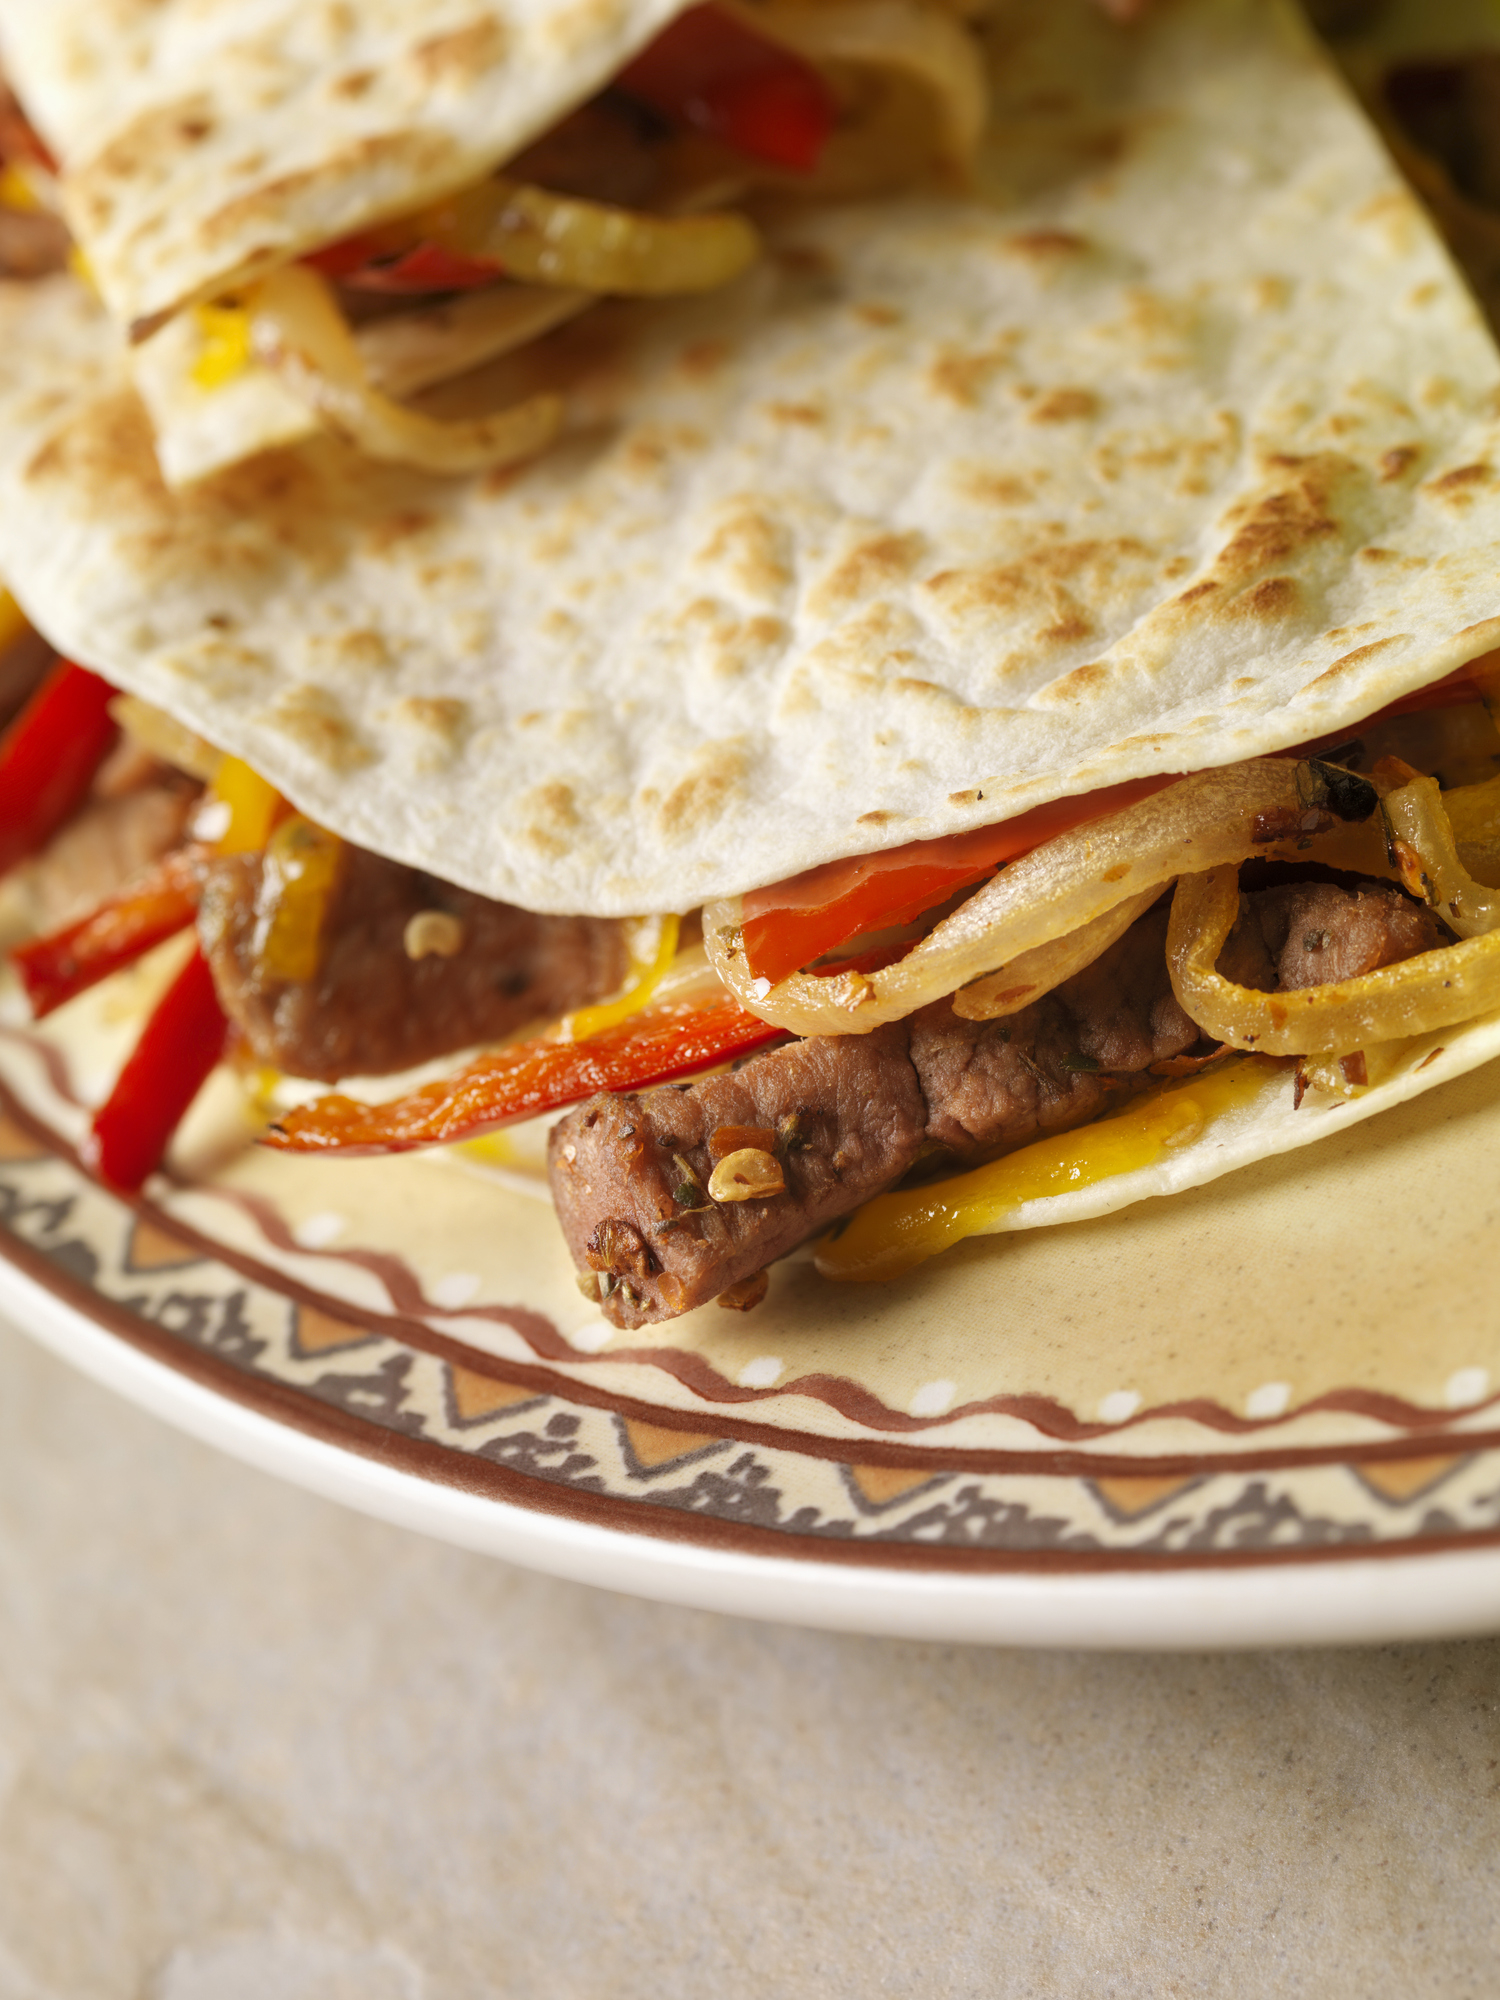 Close-up of a quesadilla filled with cheese, beef, and bell peppers on a decorated plate